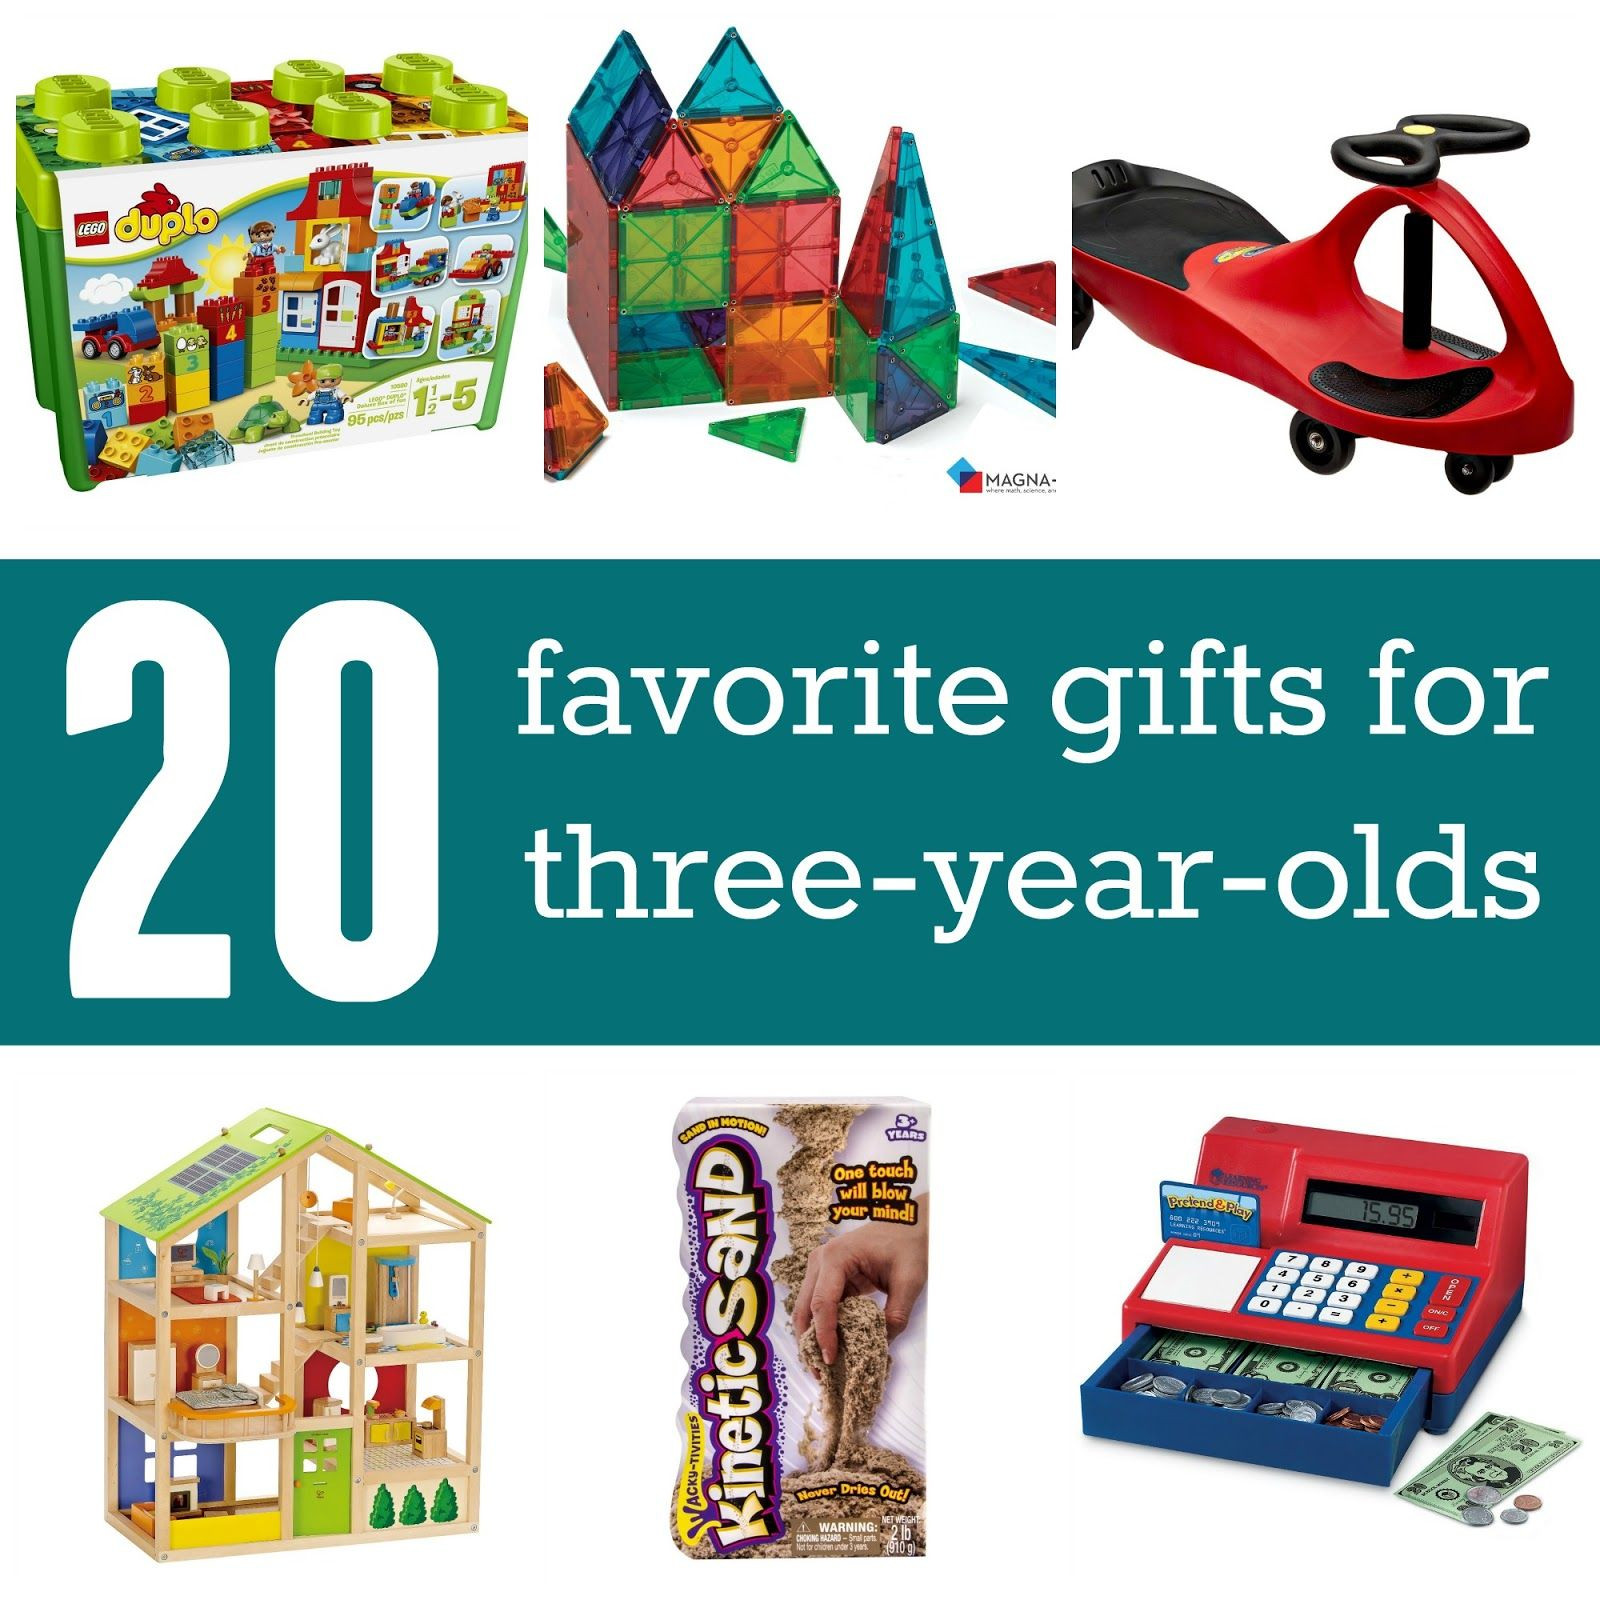 3 Year Old Christmas Gift Ideas
 Favorite Gifts for 3 year olds